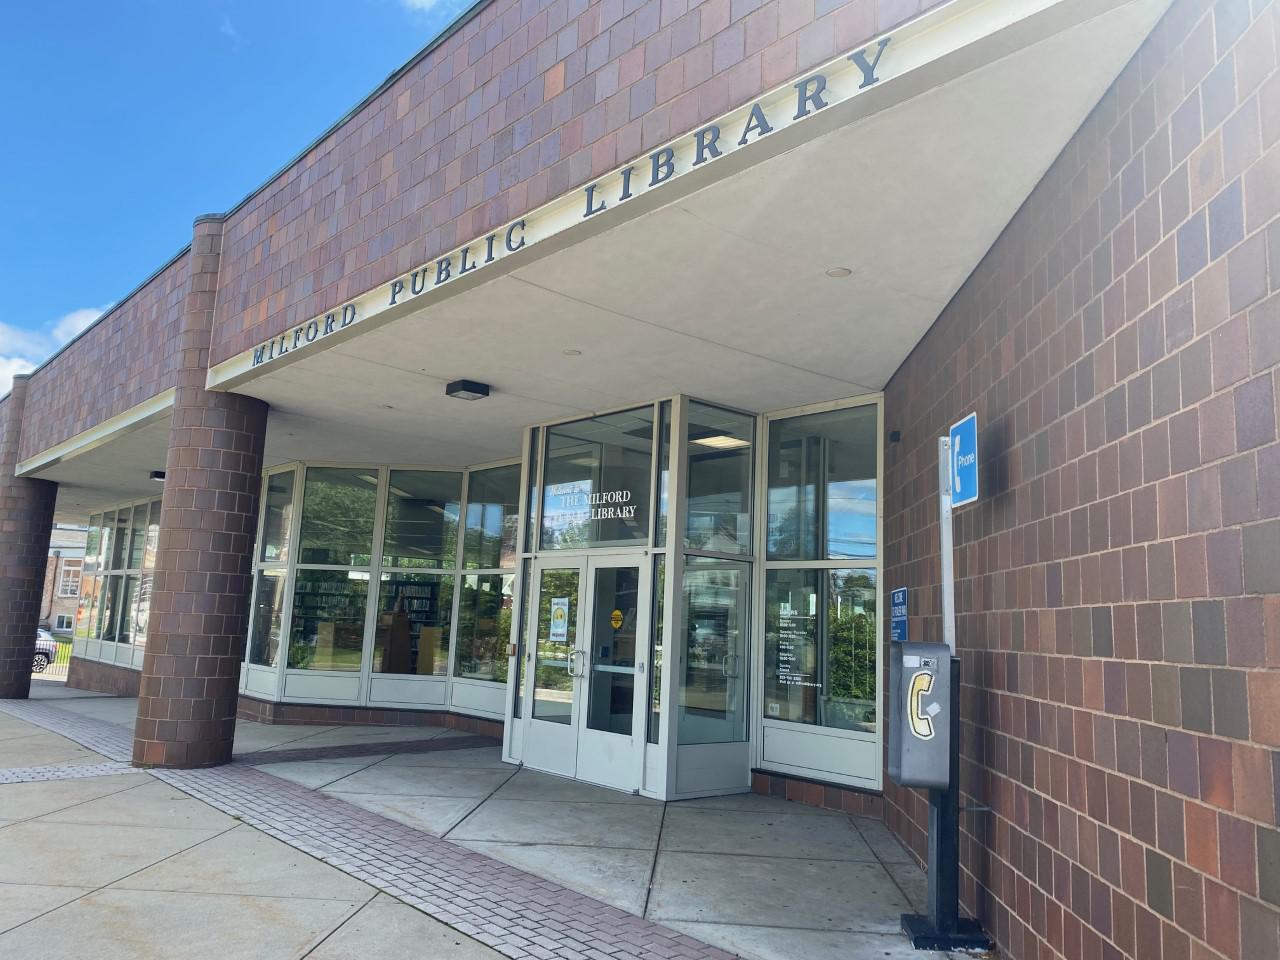 Milford Library hosts online talks from best-selling authors - New Haven Register